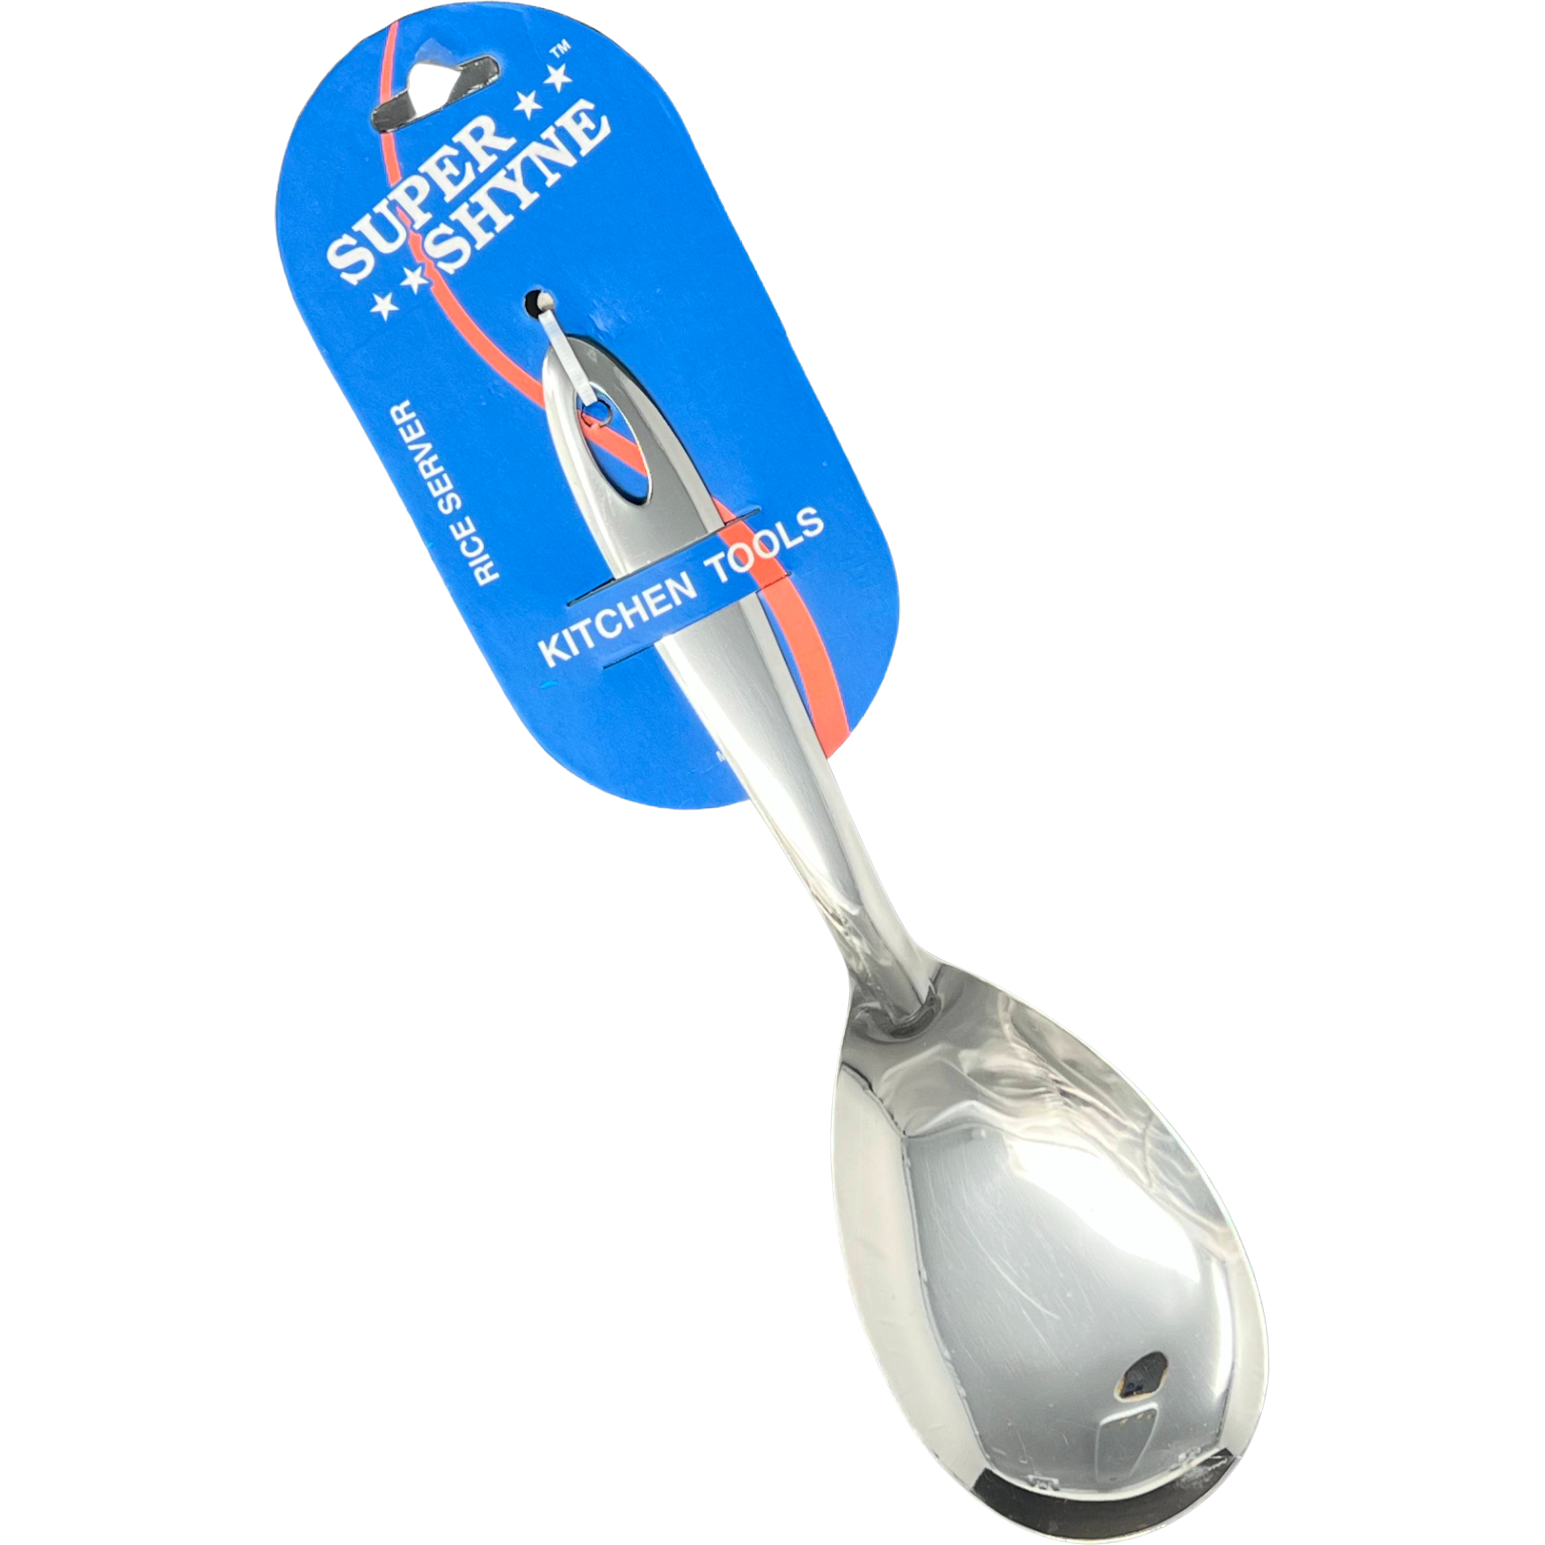 Case of 6 - Super Shyne Stainless Steel Rice Serving Spoon